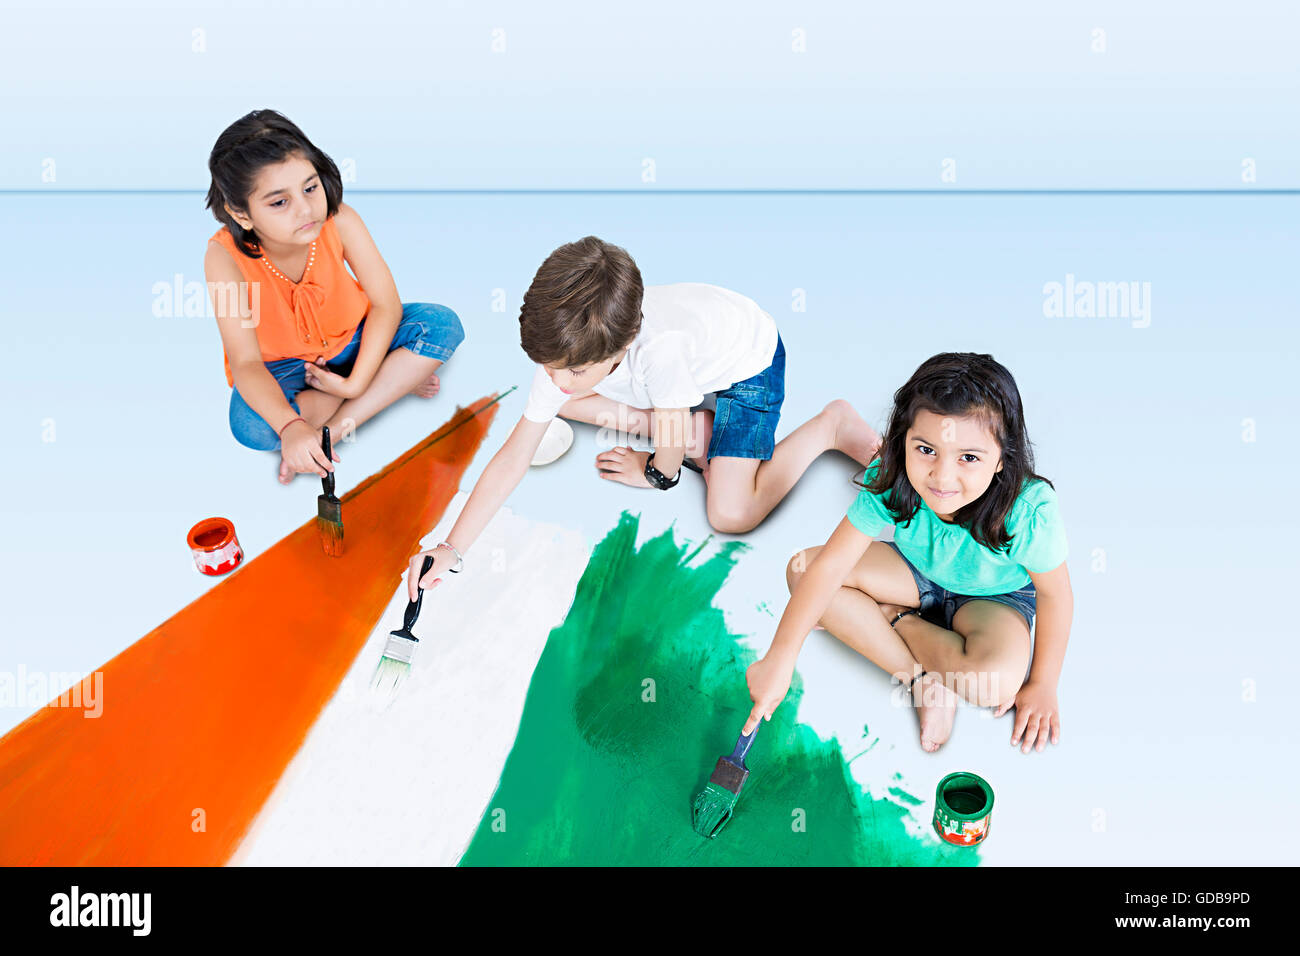 3 indians Kids friends Independence Day Flag Painting Stock Photo